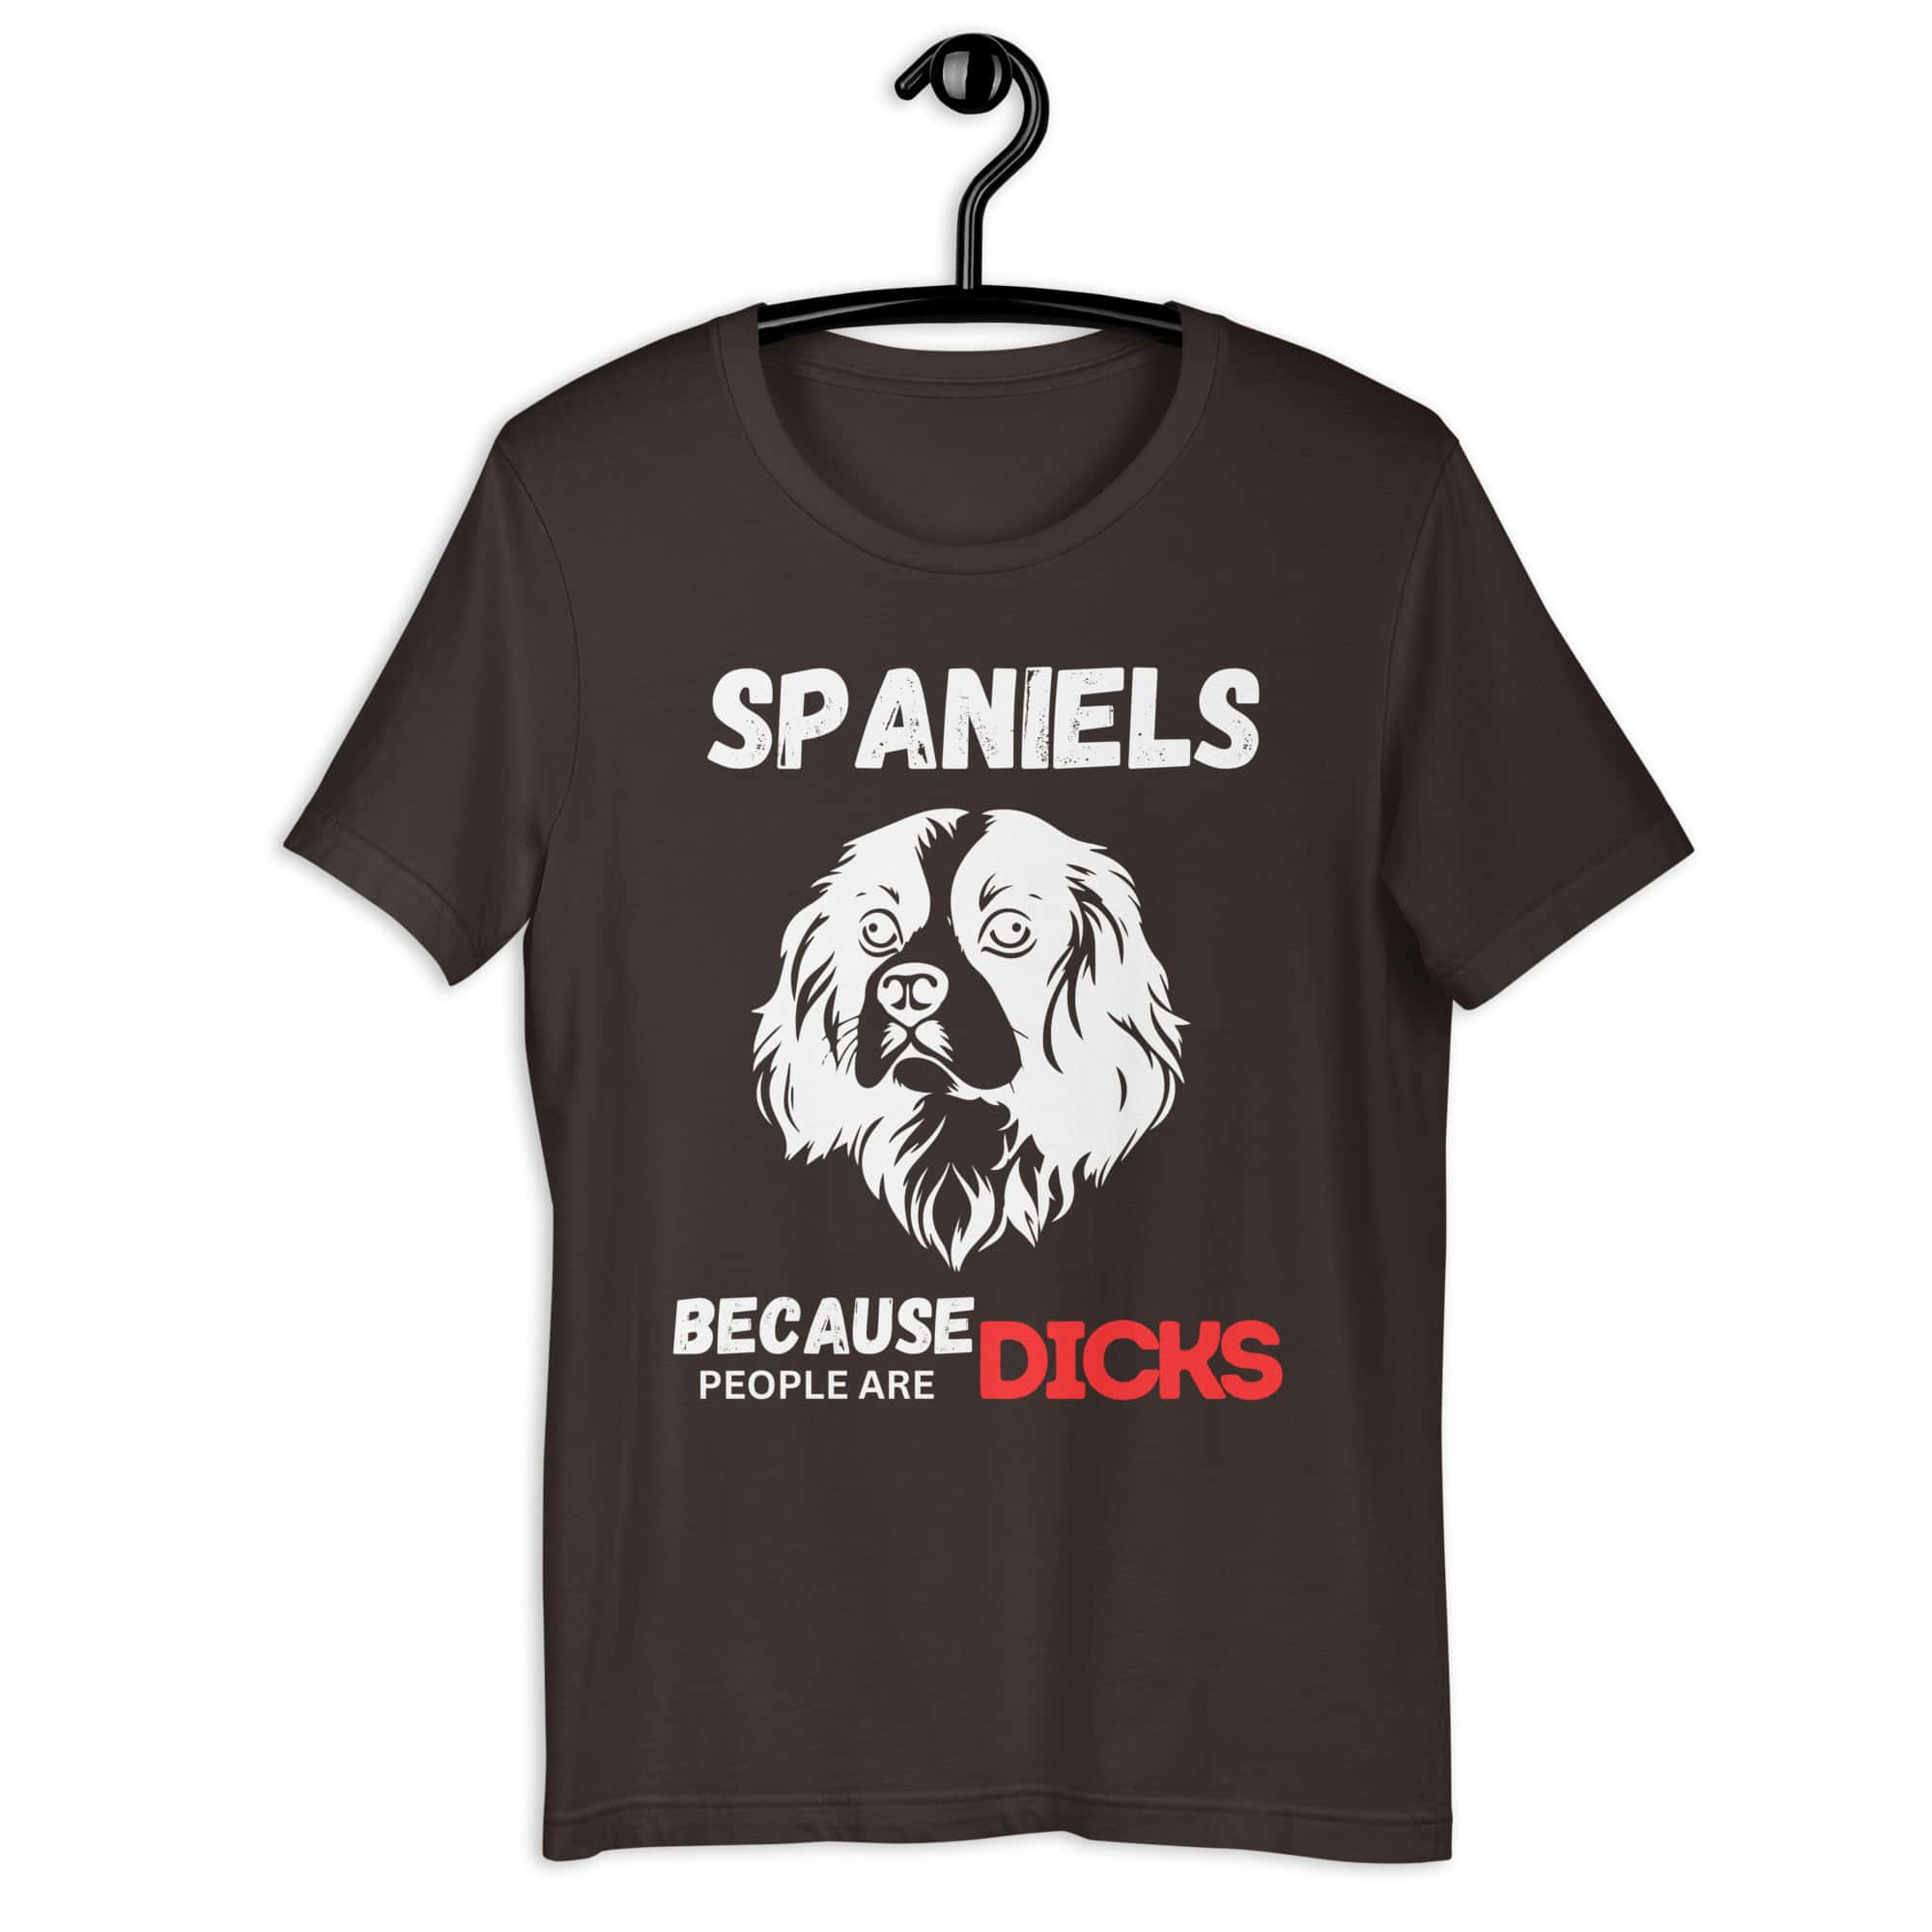 Spaniels Because People Are Dicks Unisex T-Shirt Brown